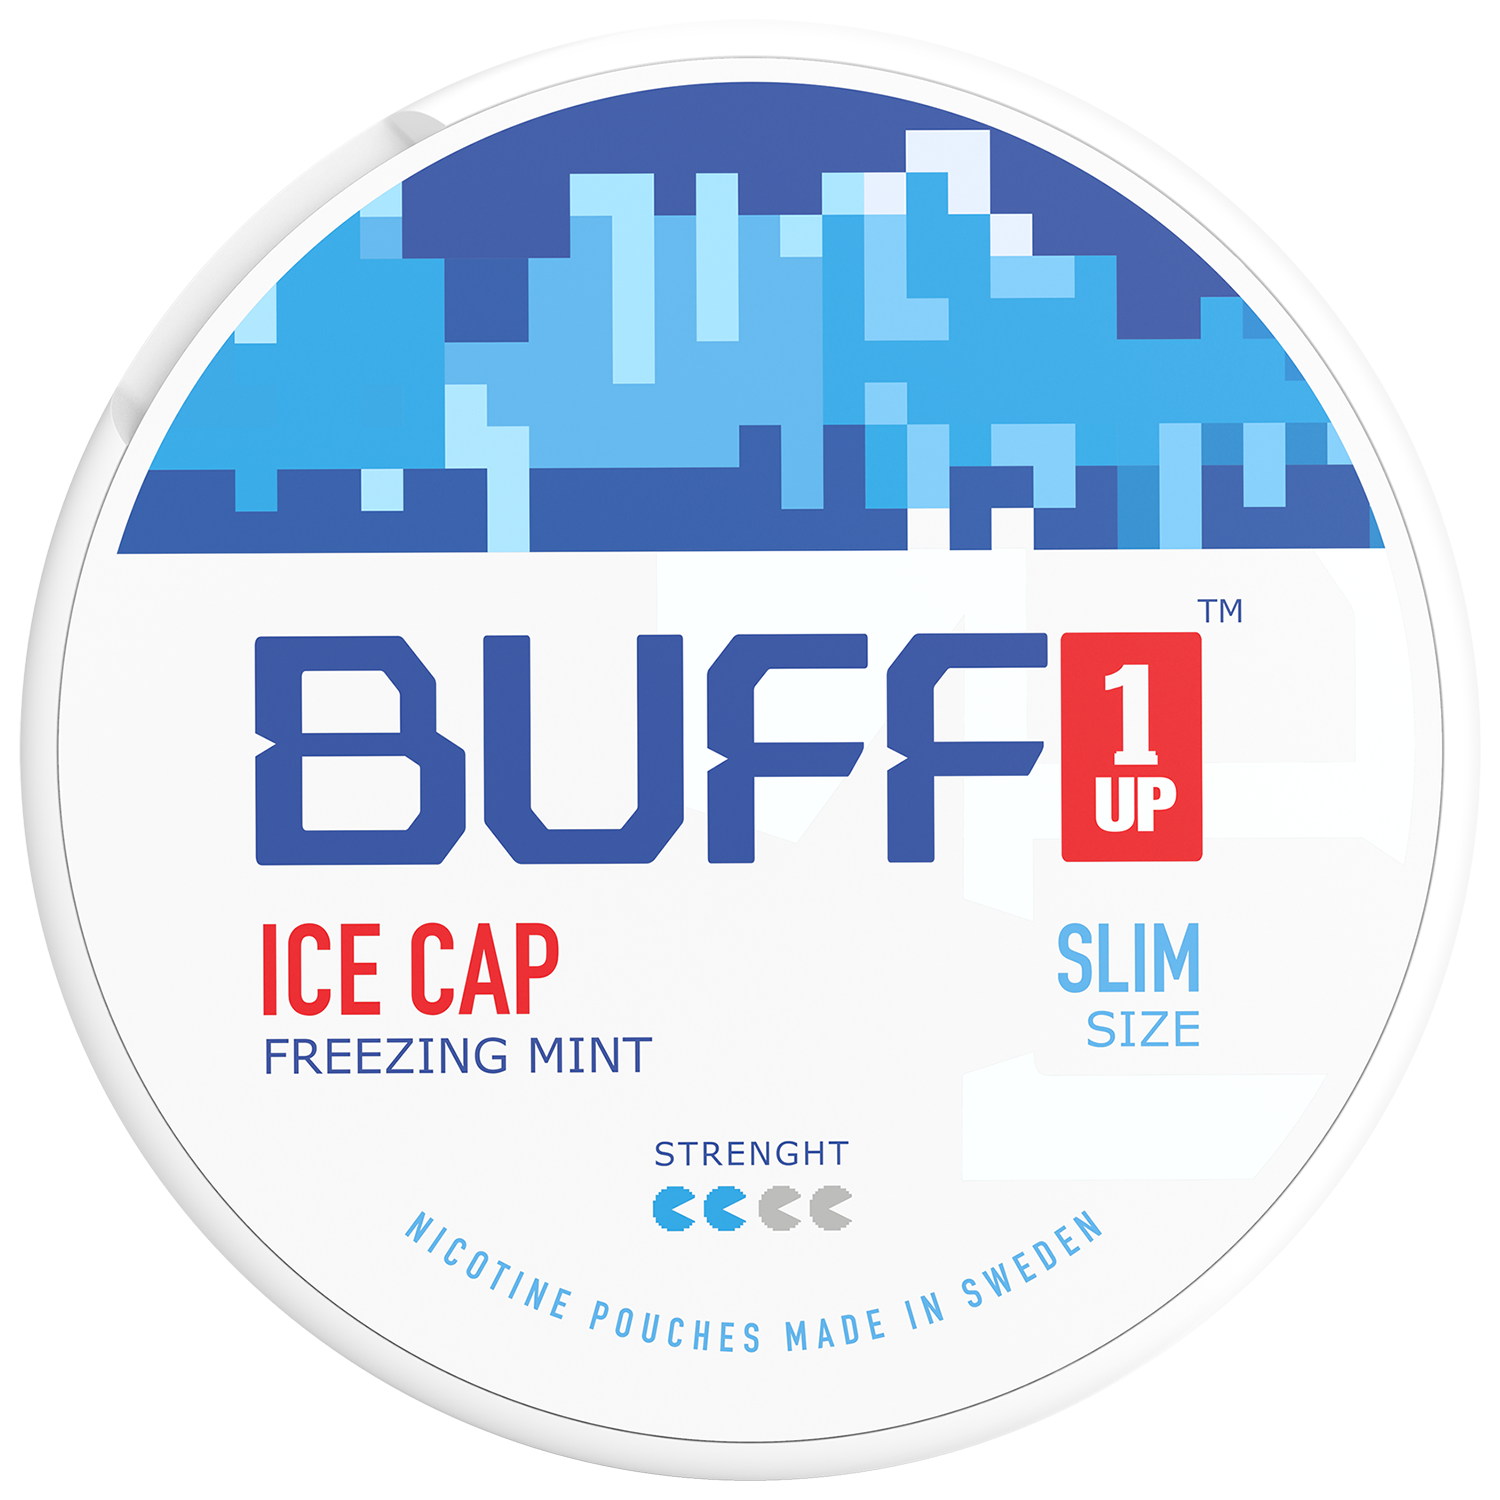 Buff 1Up Ice Cap Freezing Mint Flavor Nicotine Pouches